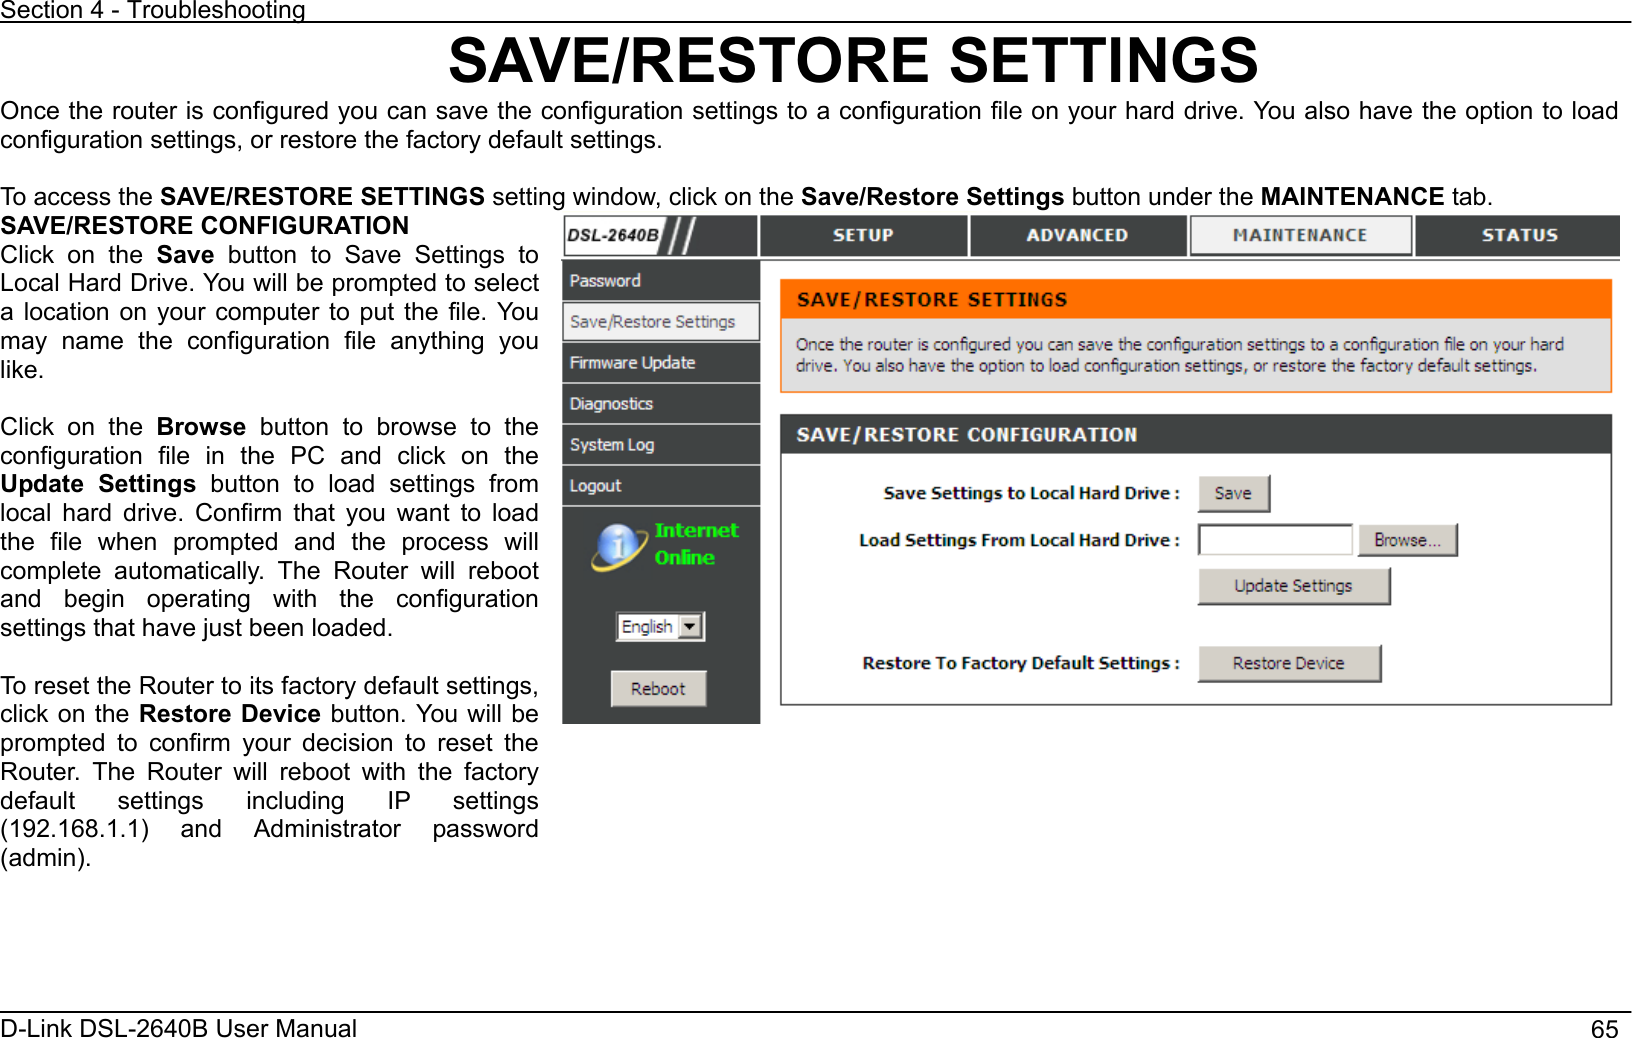 Section 4 - Troubleshooting D-Link DSL-2640B User Manual                                       65SAVE/RESTORE SETTINGS Once the router is configured you can save the configuration settings to a configuration file on your hard drive. You also have the option to load configuration settings, or restore the factory default settings. To access the SAVE/RESTORE SETTINGS setting window, click on the Save/Restore Settings button under the MAINTENANCE tab. SAVE/RESTORE CONFIGURATION Click on the Save button to Save Settings to Local Hard Drive. You will be prompted to select a location on your computer to put the file. You may name the configuration file anything you like.Click on the Browse button to browse to the configuration file in the PC and click on the Update Settings button to load settings from local hard drive. Confirm that you want to load the file when prompted and the process will complete automatically. The Router will reboot and begin operating with the configuration settings that have just been loaded. To reset the Router to its factory default settings, click on the Restore Device button. You will be prompted to confirm your decision to reset the Router. The Router will reboot with the factory default settings including IP settings (192.168.1.1) and Administrator password (admin).